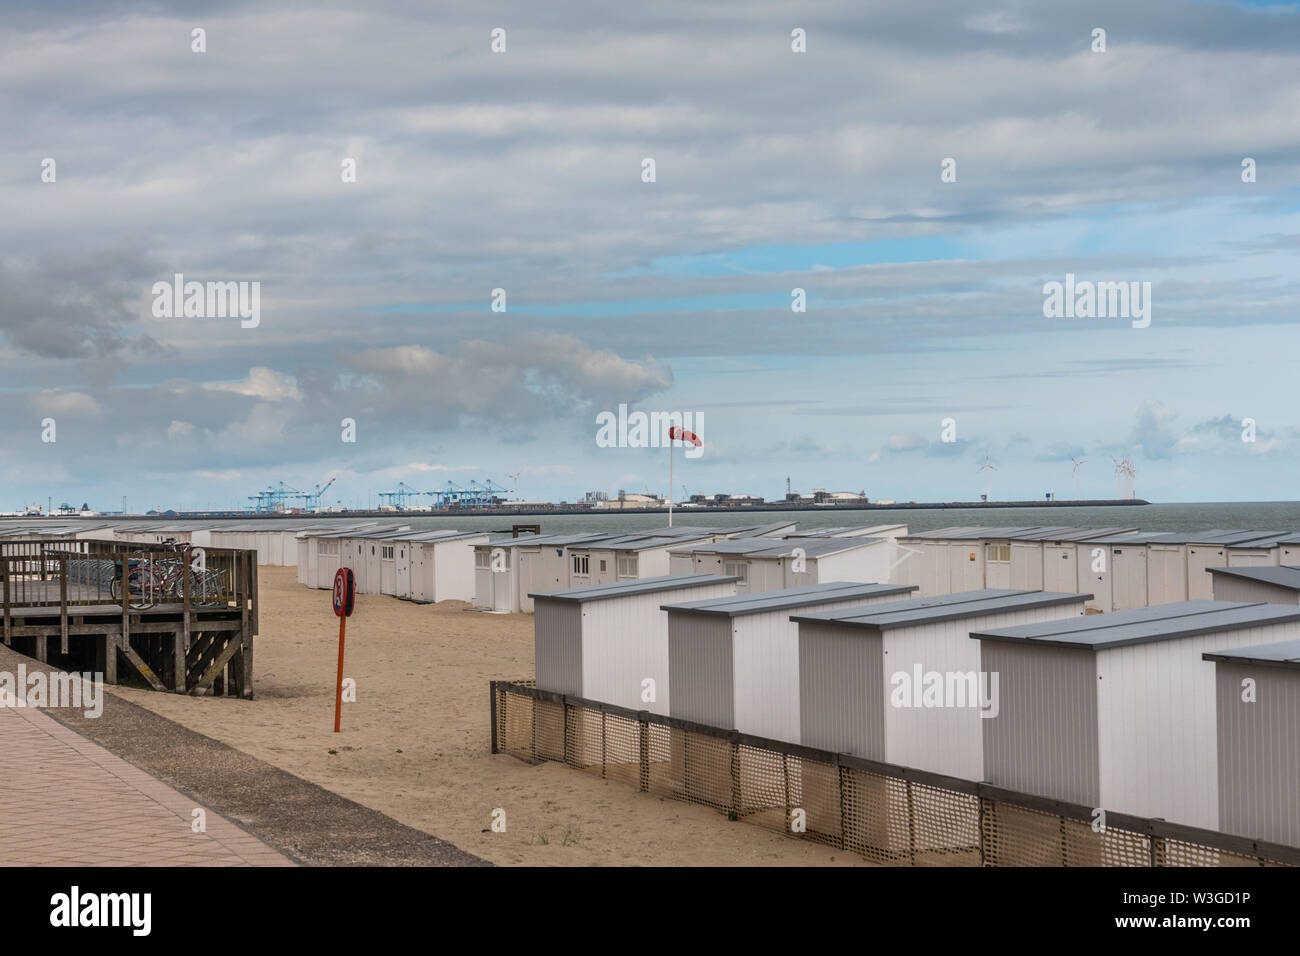 Knokke-Heist, Flanders, Belgium -  June 16, 2019: Knokke-Zoute part of town. Rows of white beach cabins on the sand with Zeebrugge LNG-sea terminal in Stock Photo